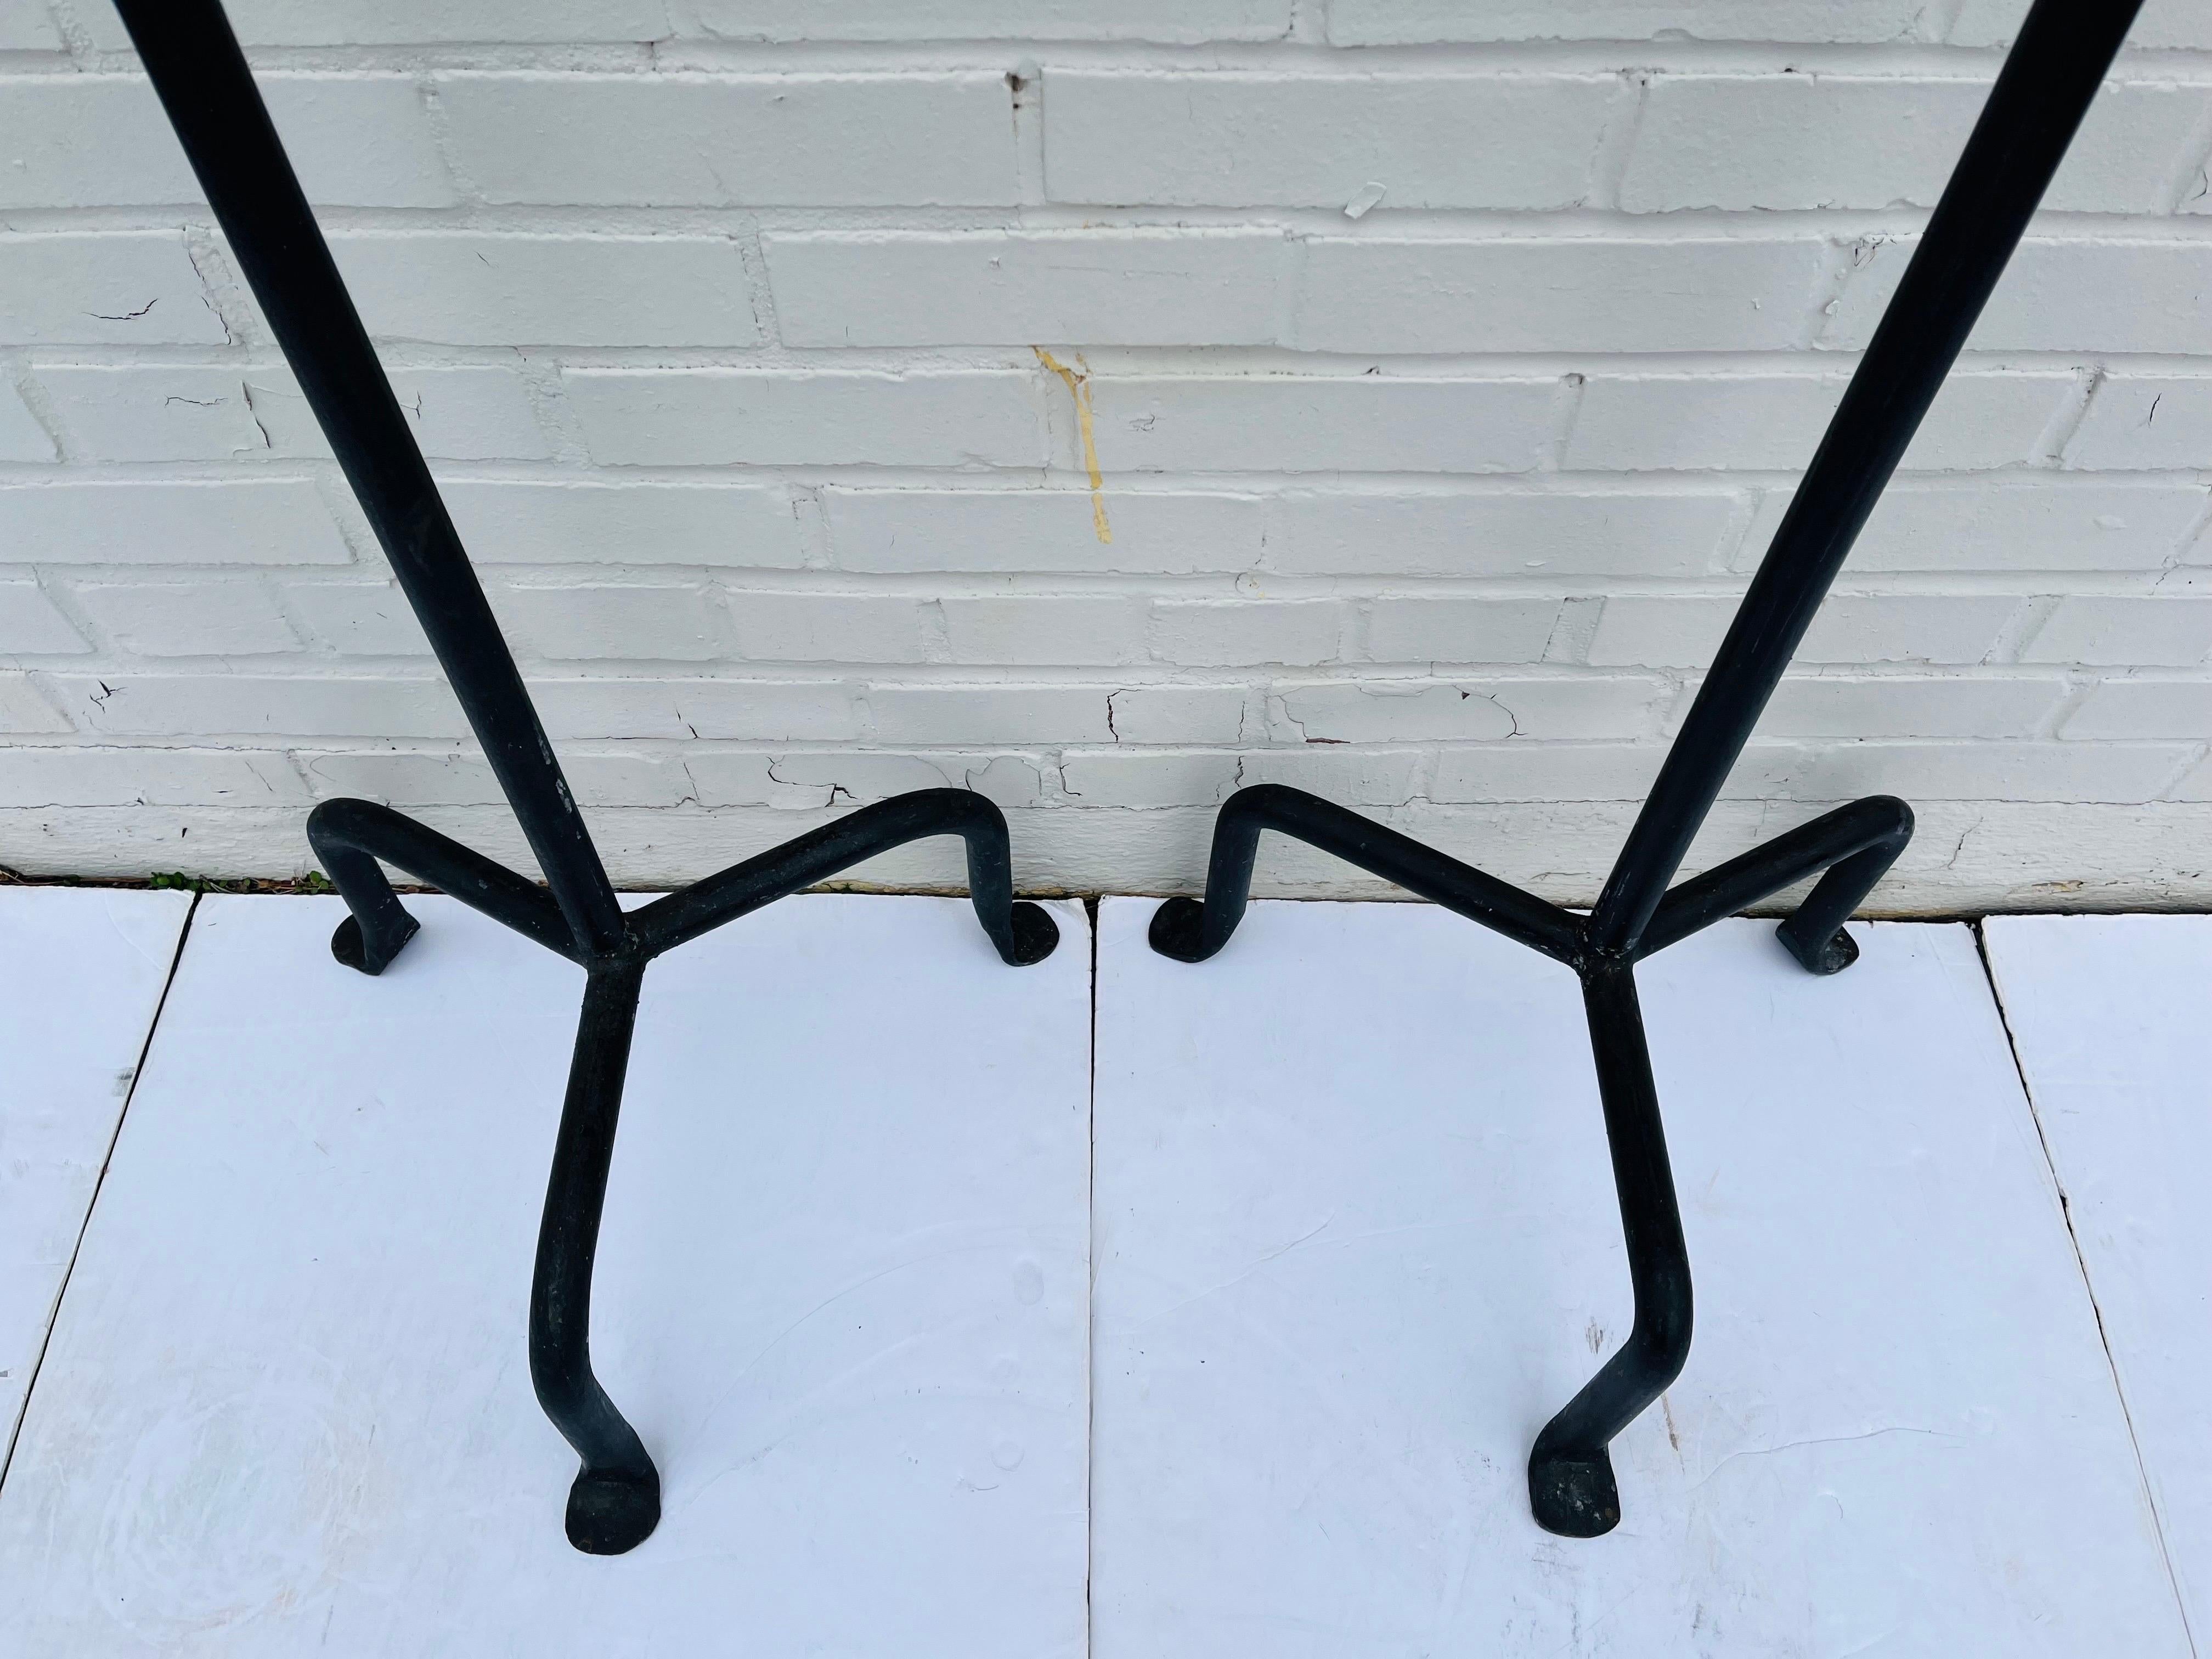 A vintage pair of wrought iron candle stick torchieres in the Post Modern style. Each floor candle stick features a tripod base with splayed, wrought feet hammered to a rounded fan shape. The shaft of the candle stick has a looping bend somewhat in